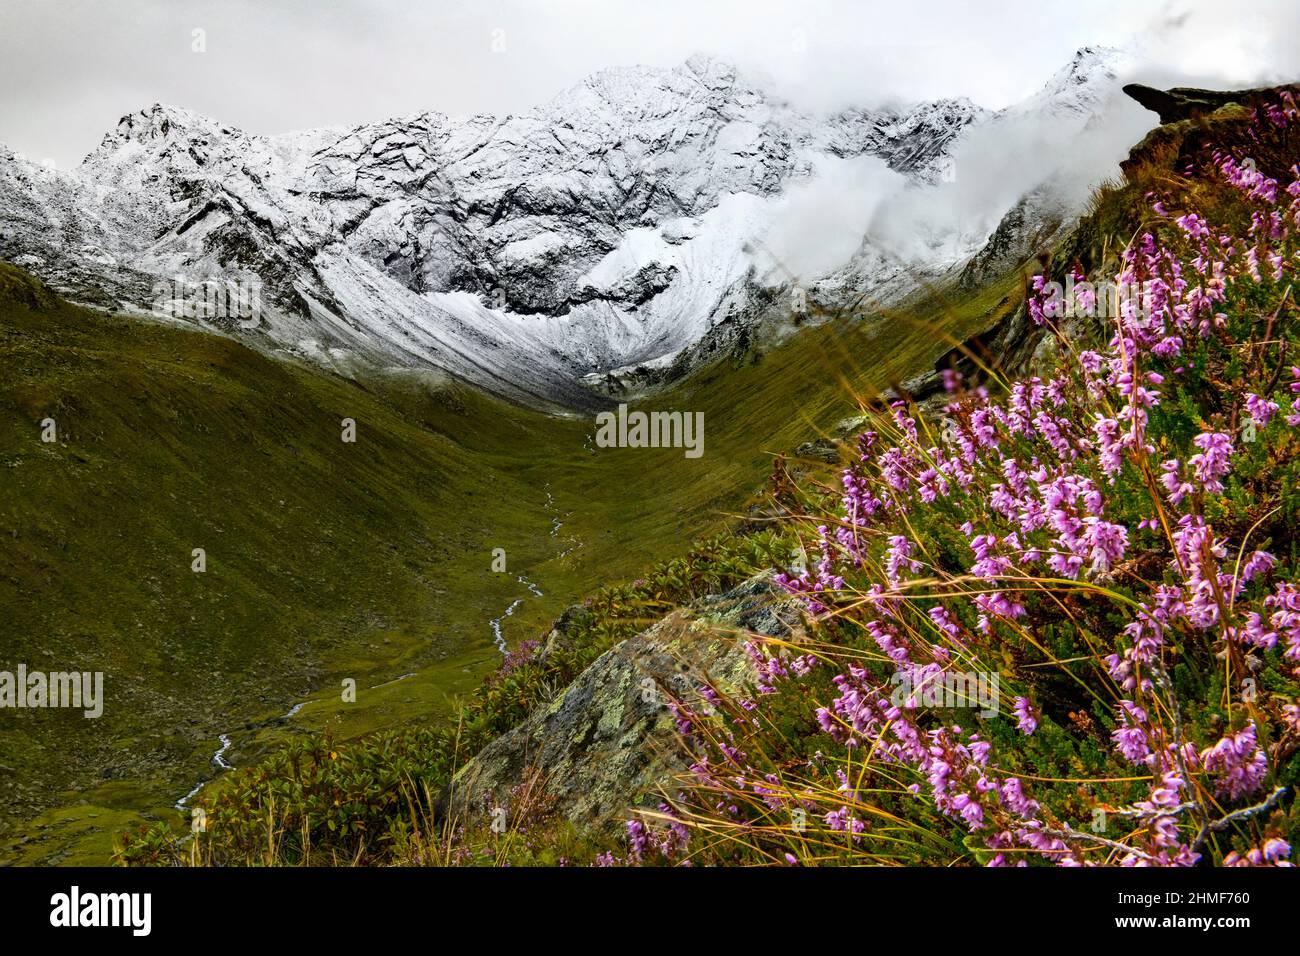 Spike heather (Erica spiculifolia), with snowy mountains in the background, Sellrain, Innsbruck, Tyrol, Austria Stock Photo